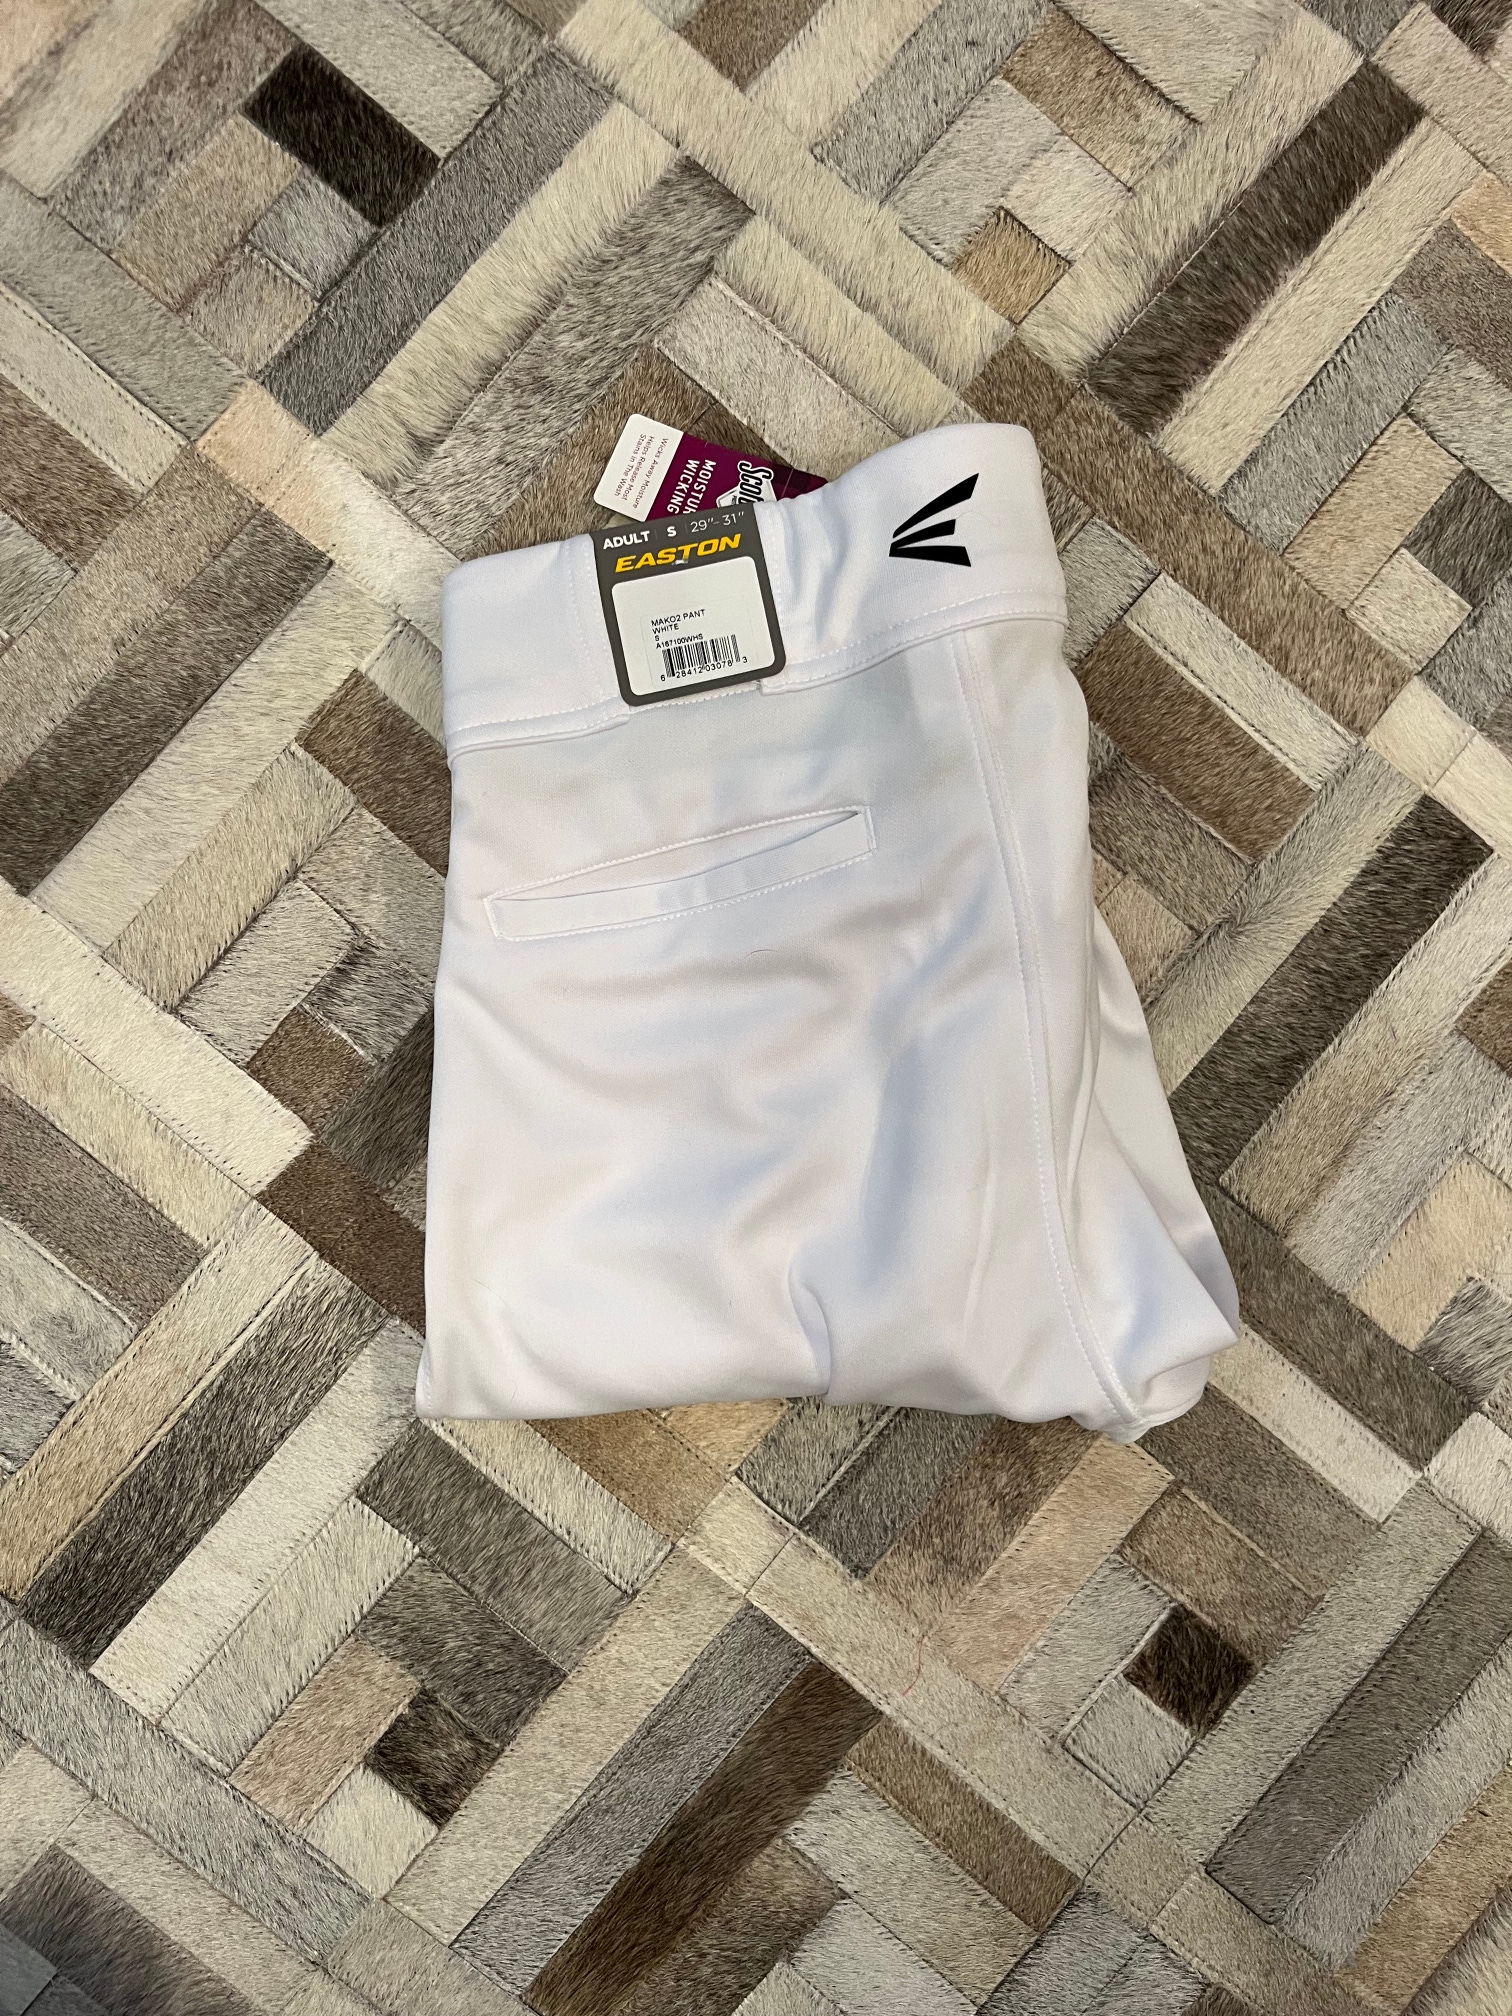 White Adult Men's New Small Easton Game Pants